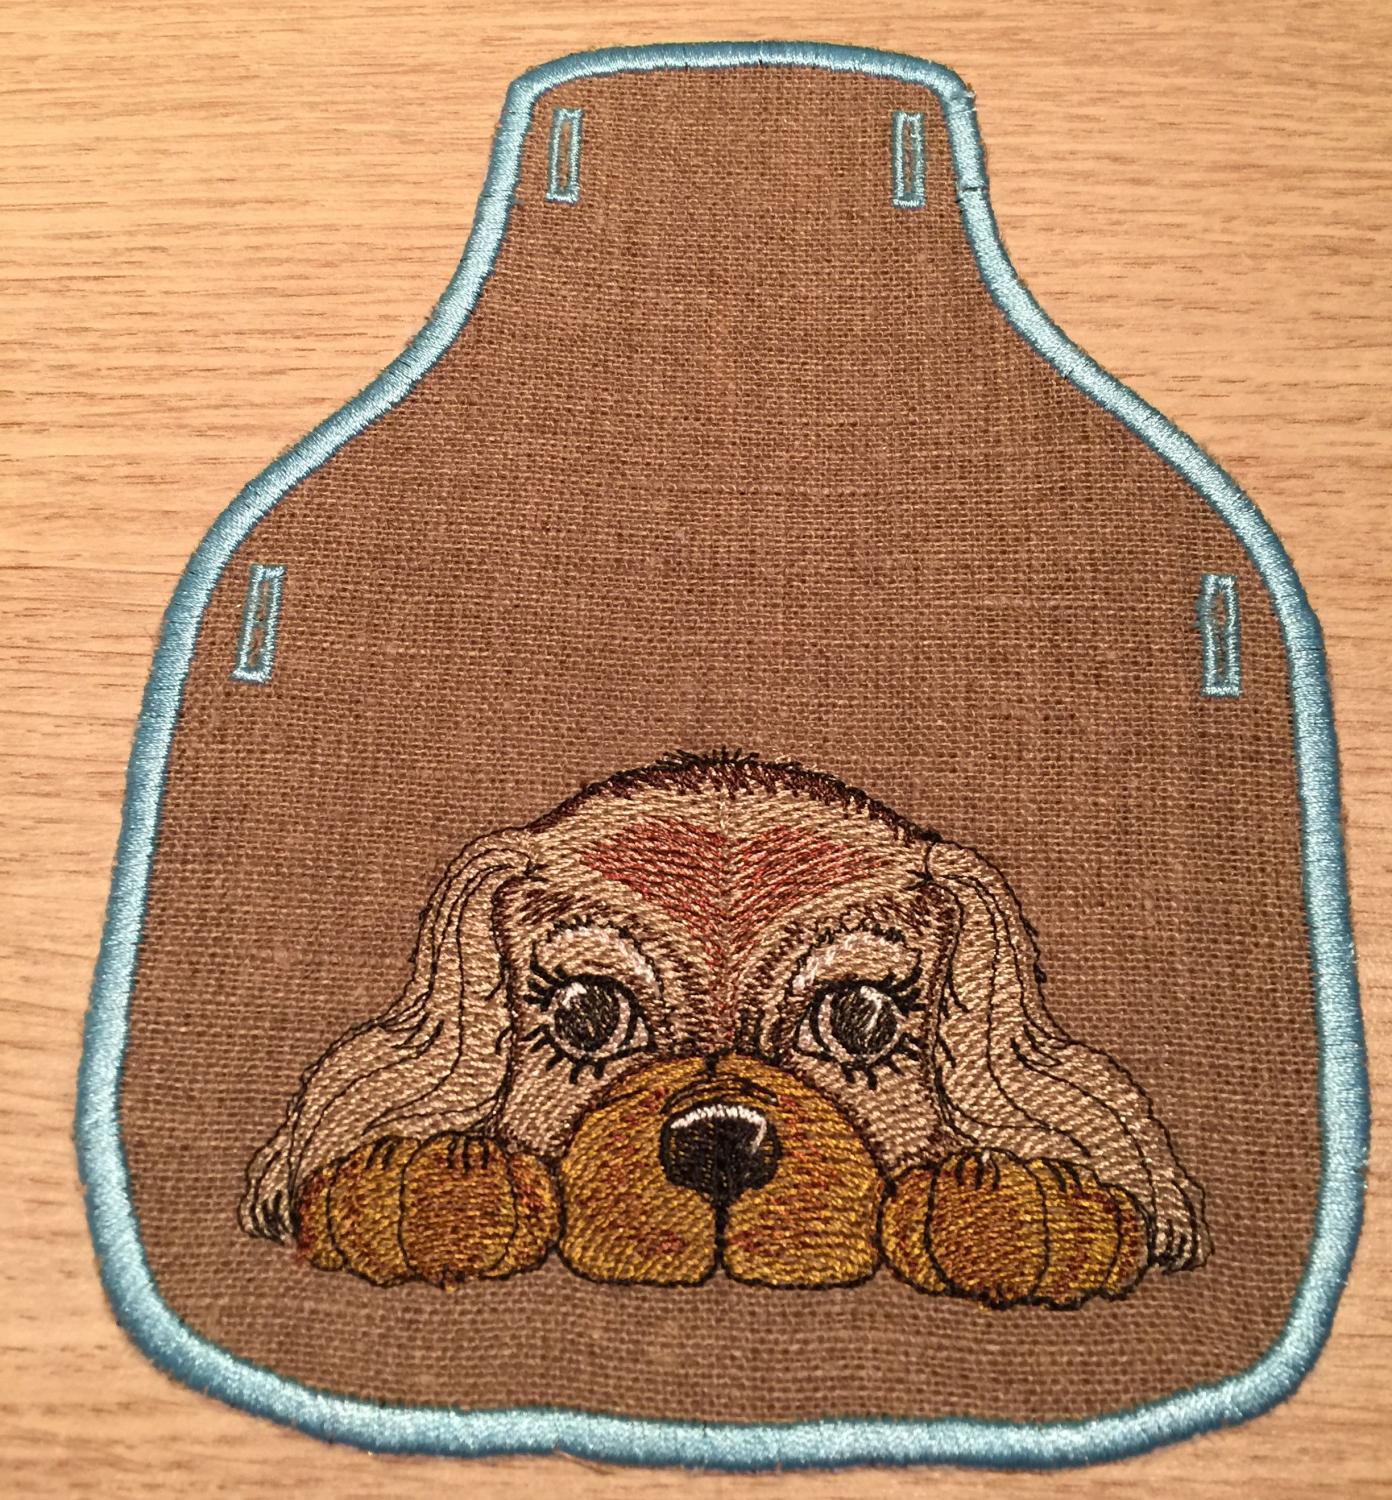 Embroidered kitchen accessory with cute spaniel